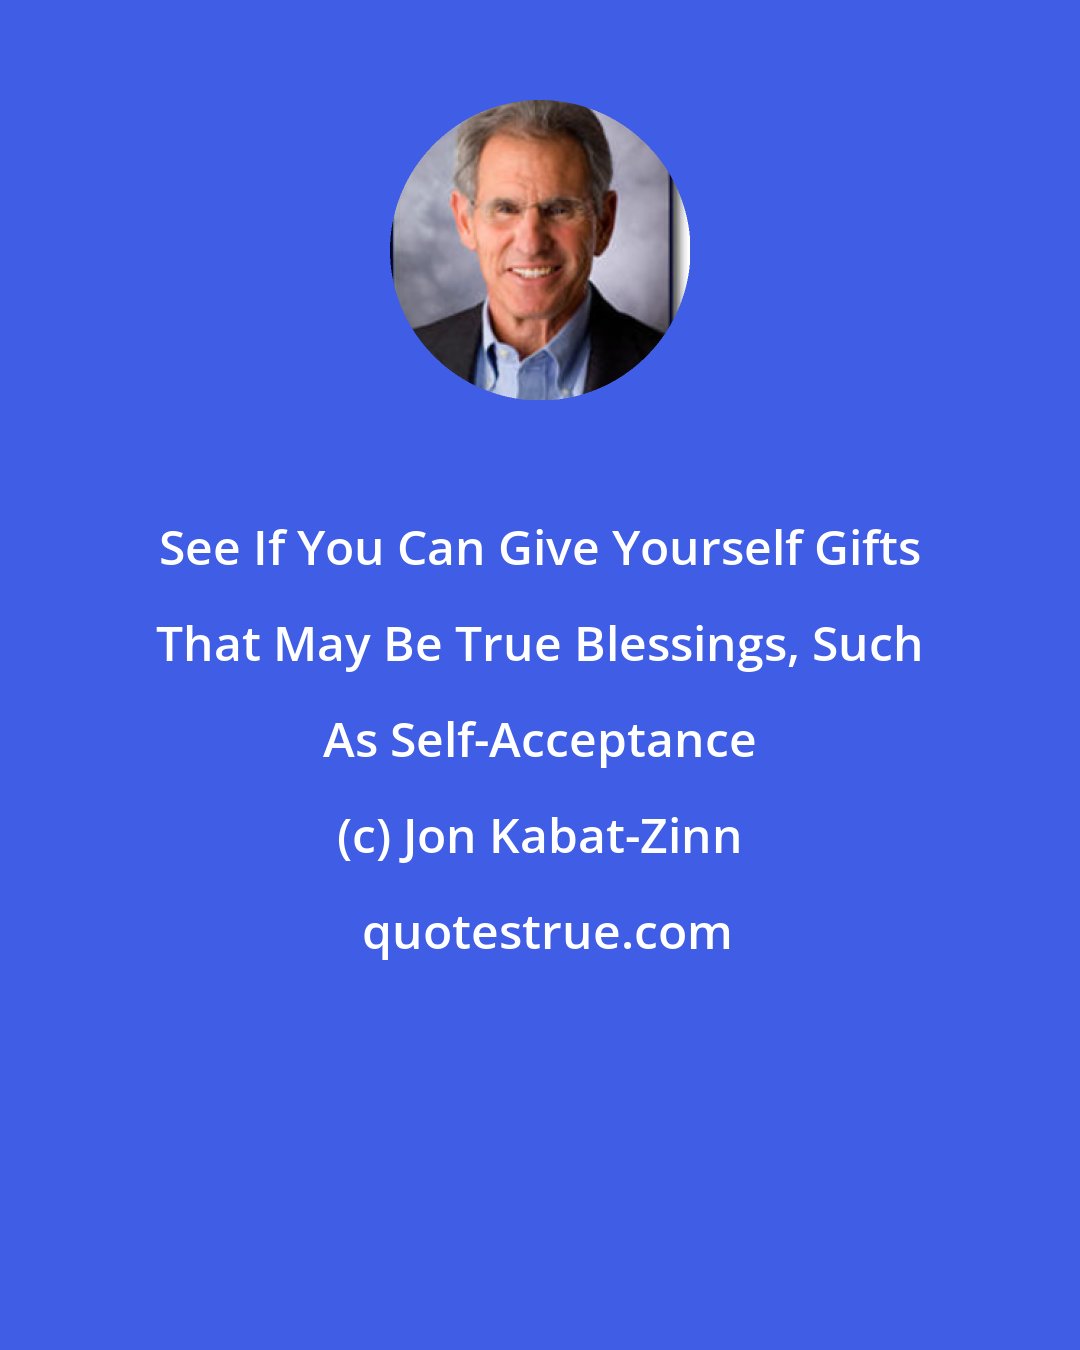 Jon Kabat-Zinn: See If You Can Give Yourself Gifts That May Be True Blessings, Such As Self-Acceptance